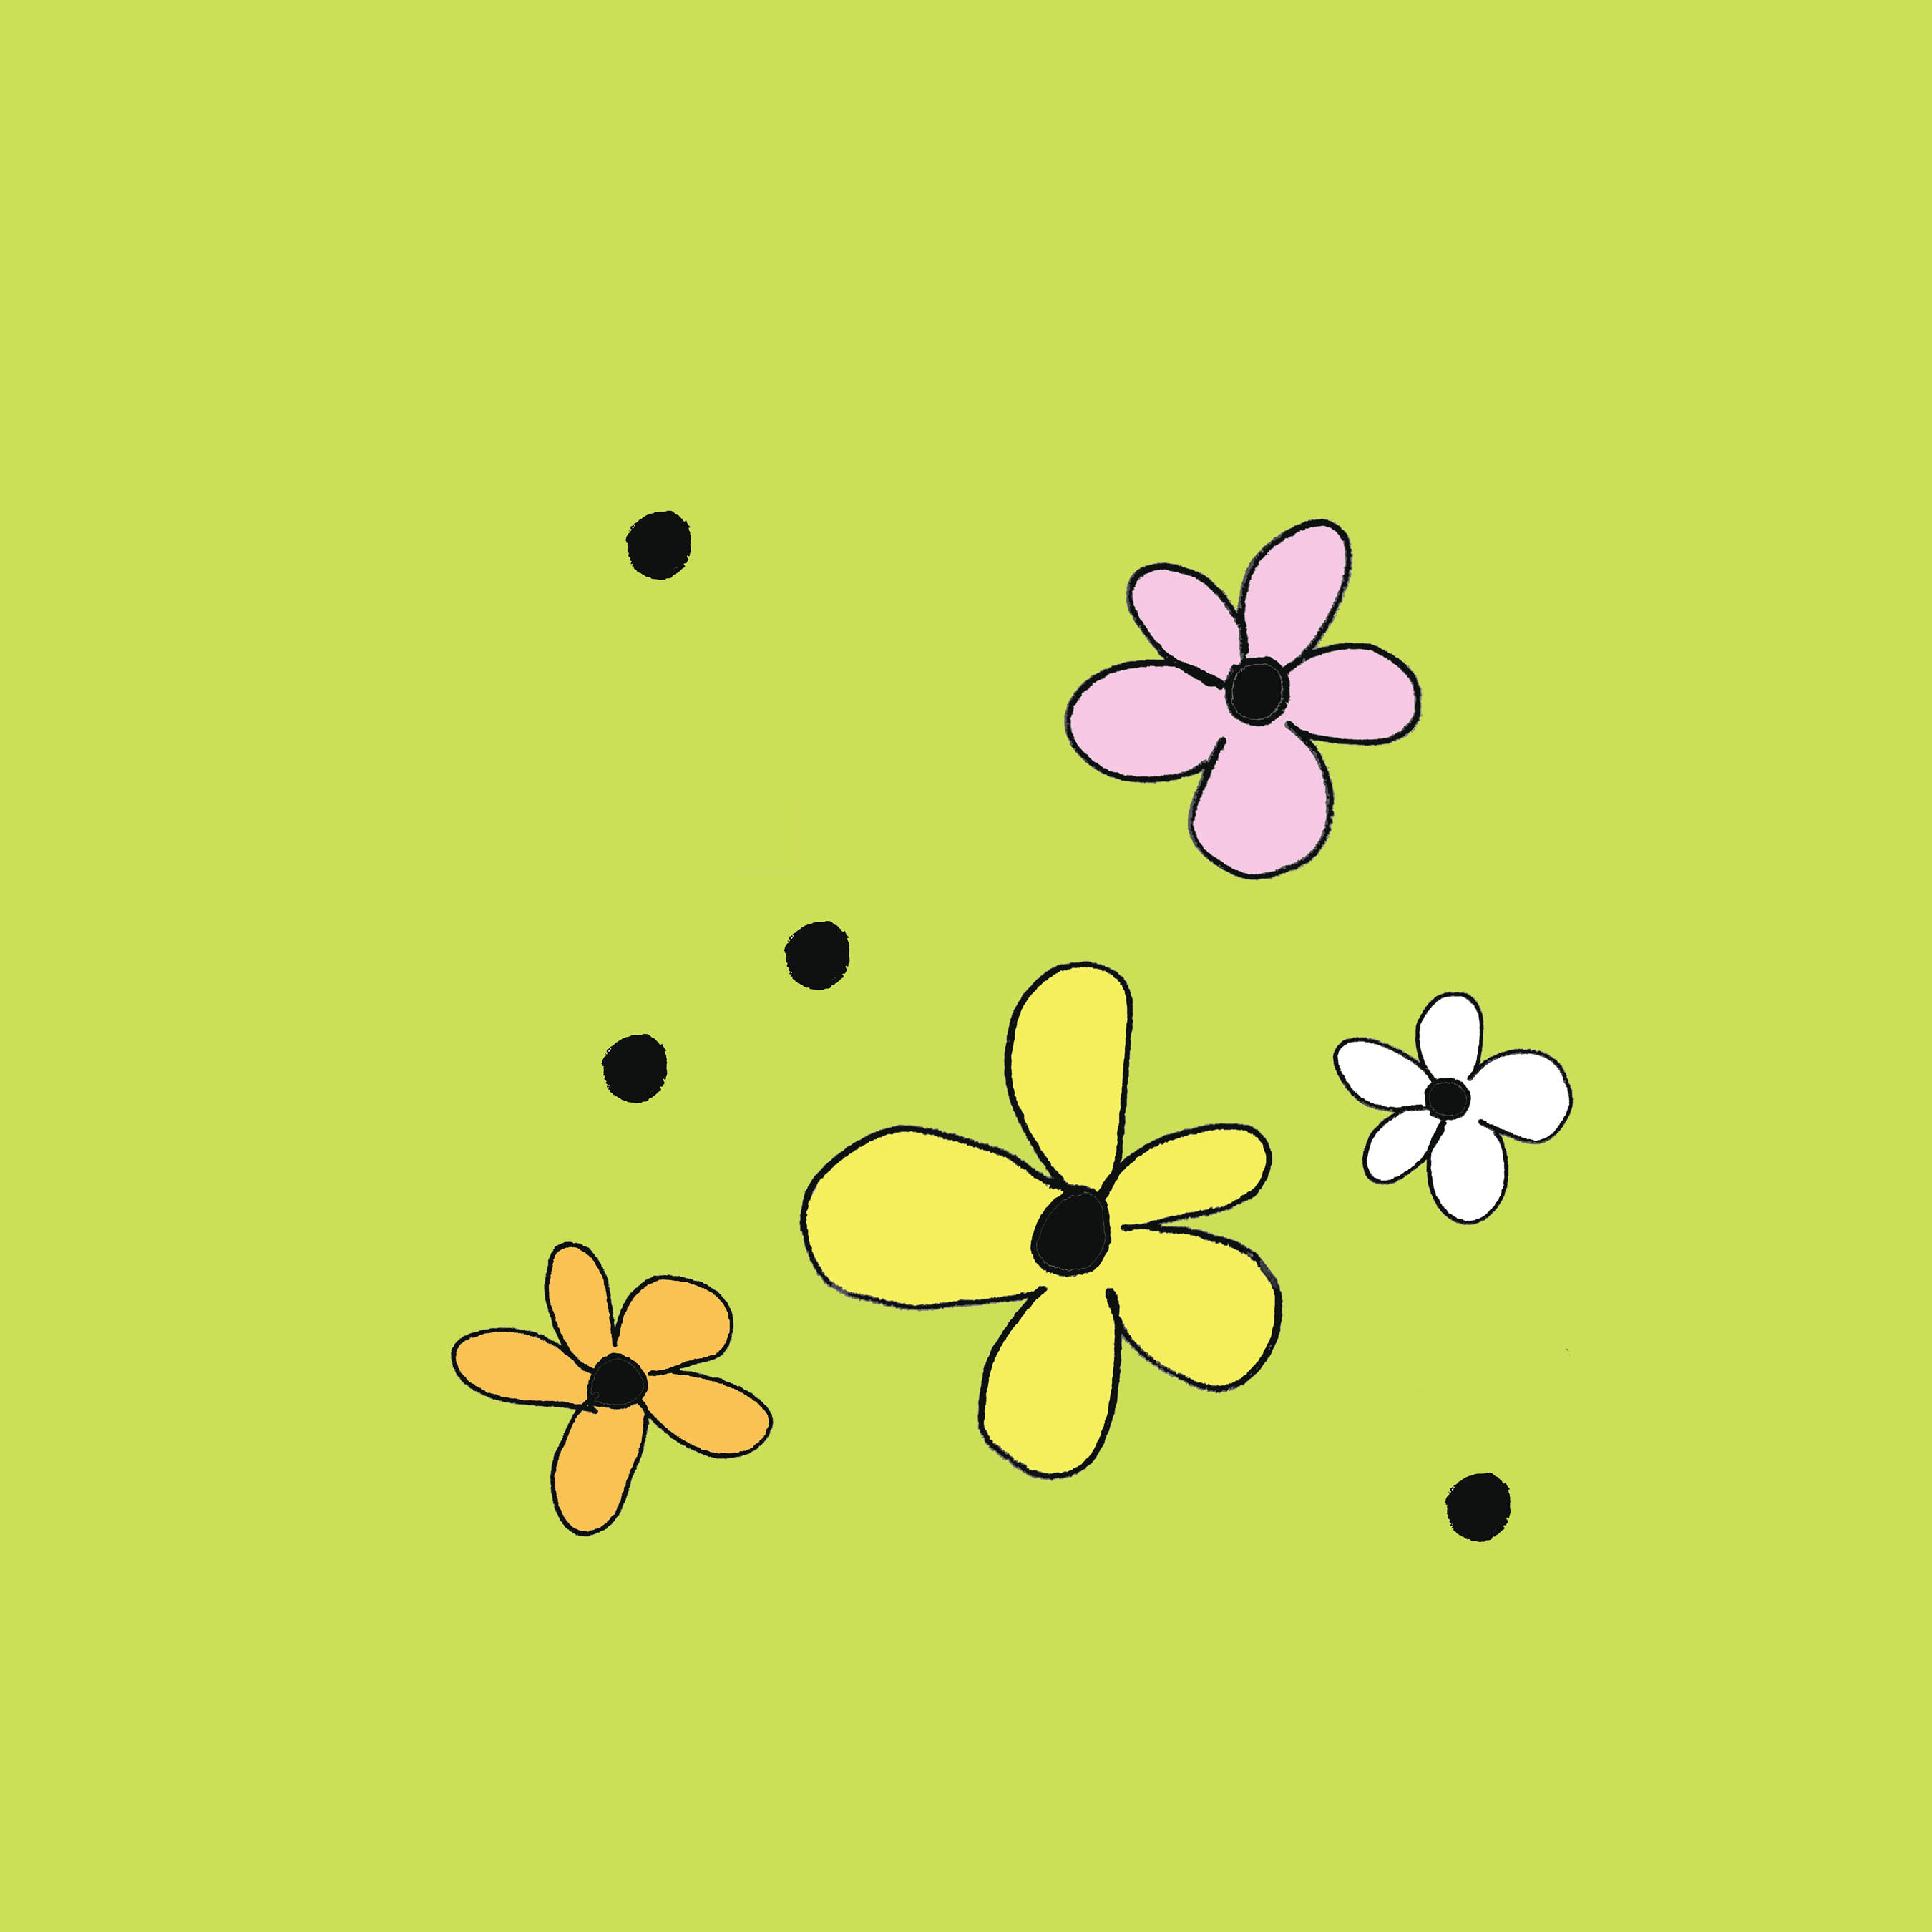 art every day number 404 flowers dots illustration